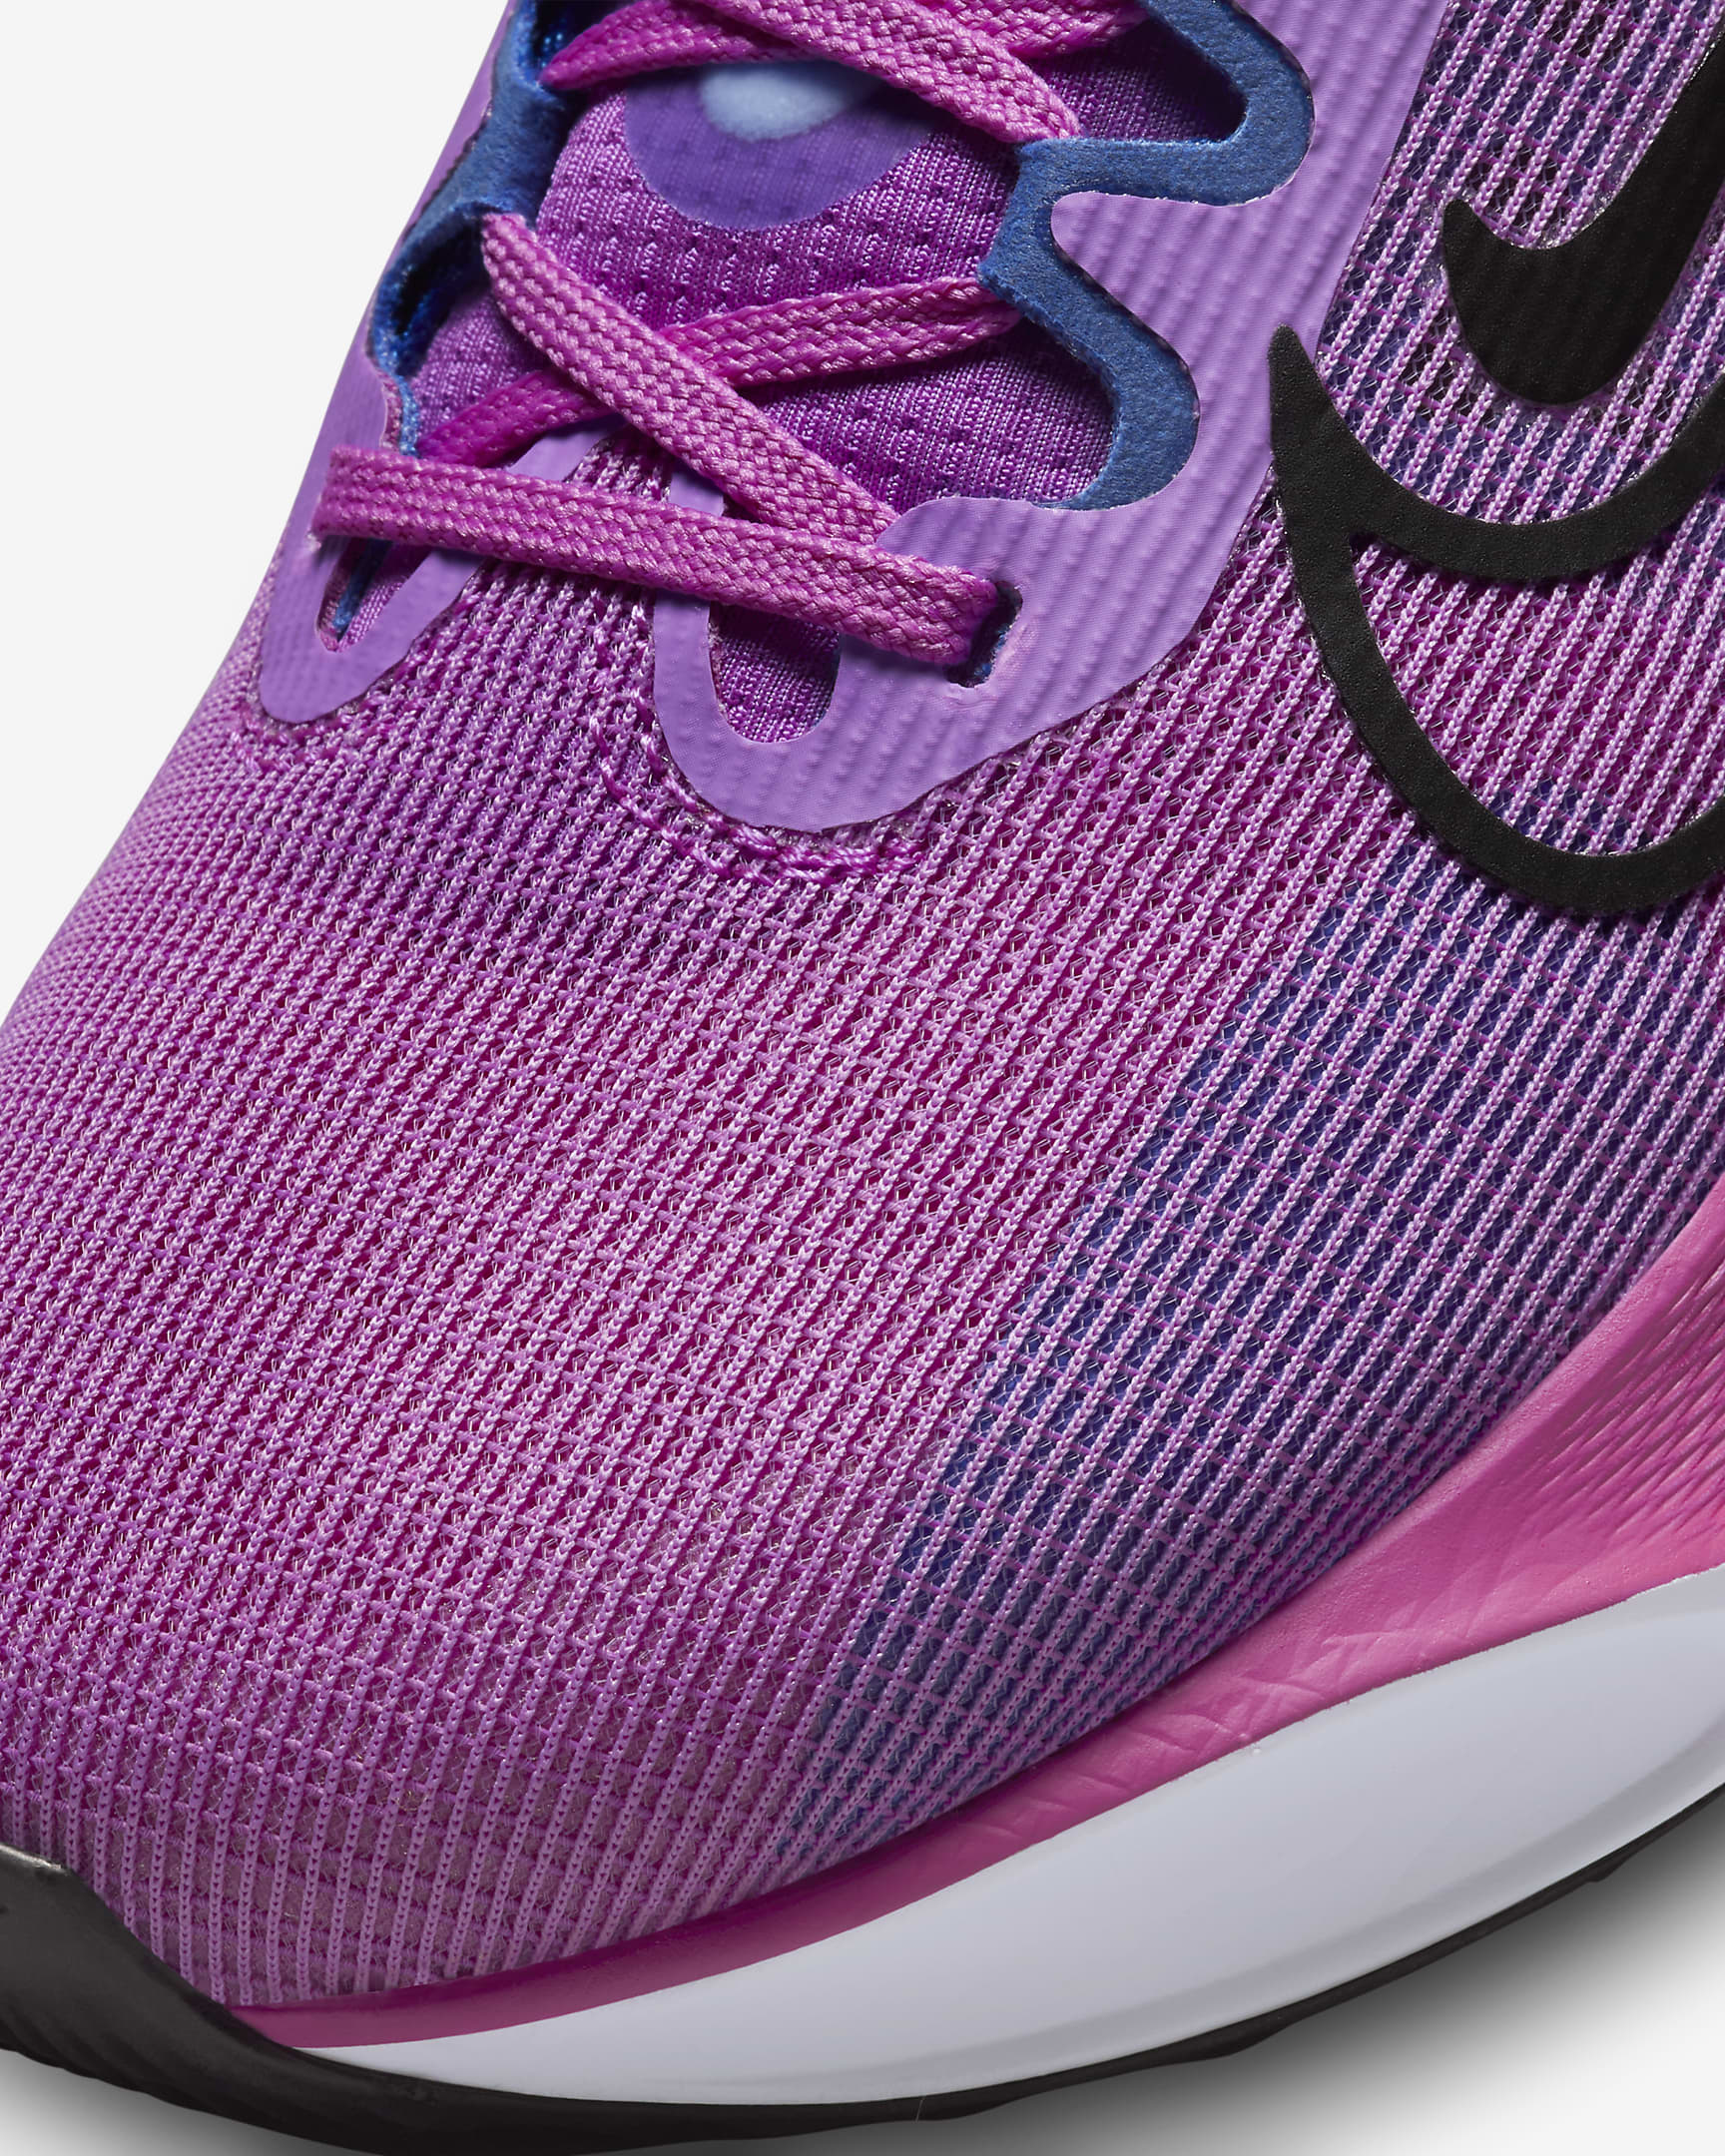 Nike Zoom Fly 5 Women's Road Running Shoes. Nike AE